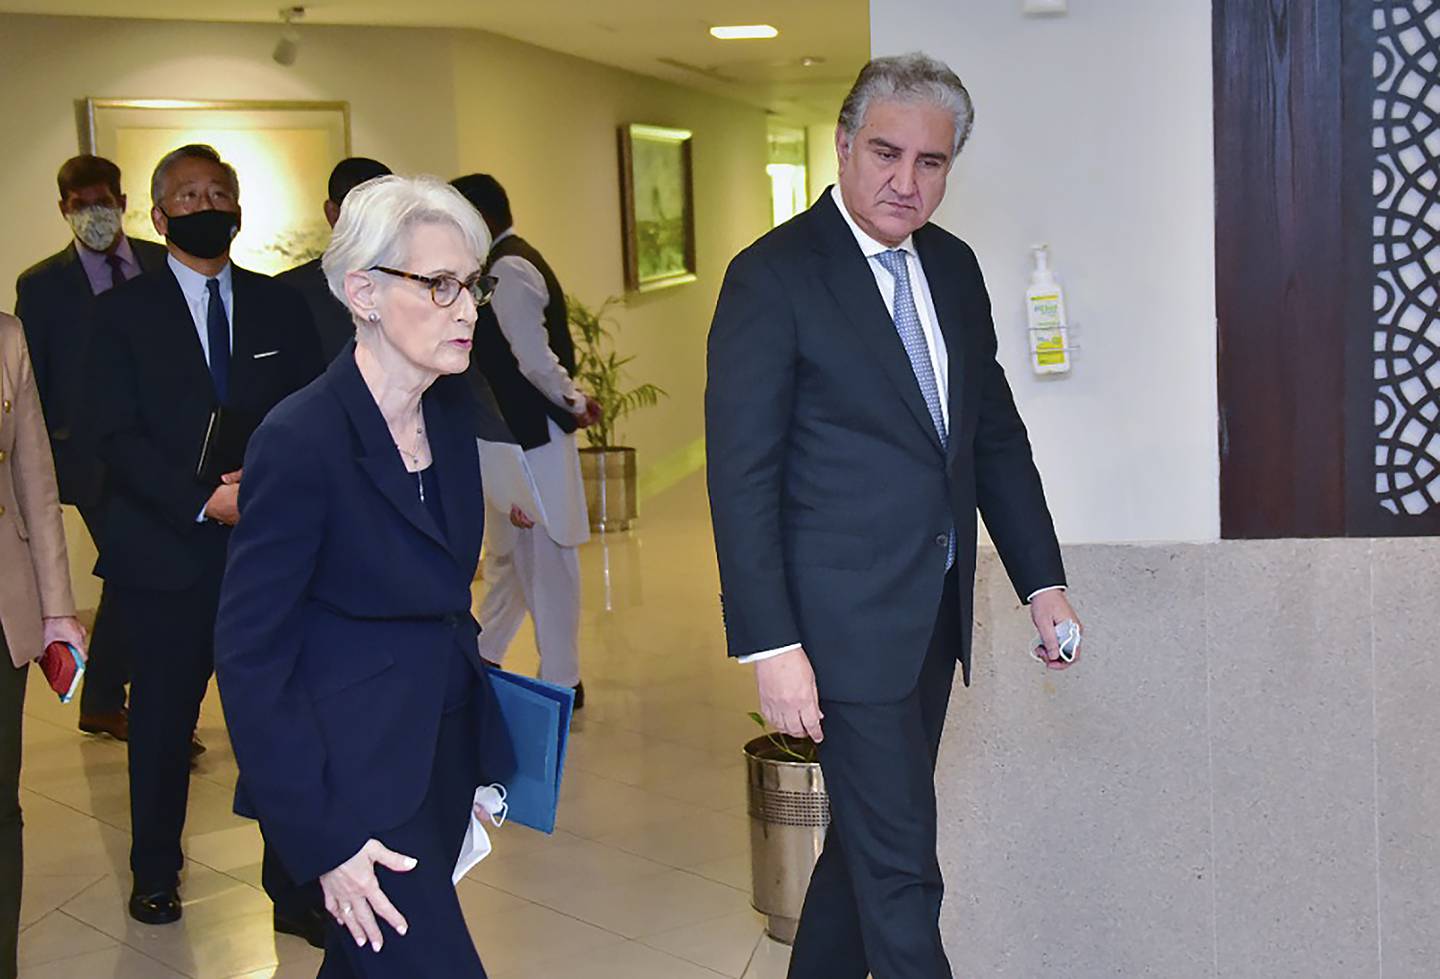 US Deputy Secretary of State Wendy Sherman, left, during her meeting with Pakistan Foreign Minister Shah Mahmood Qureshi, right in Islamabad last week. AP Photo